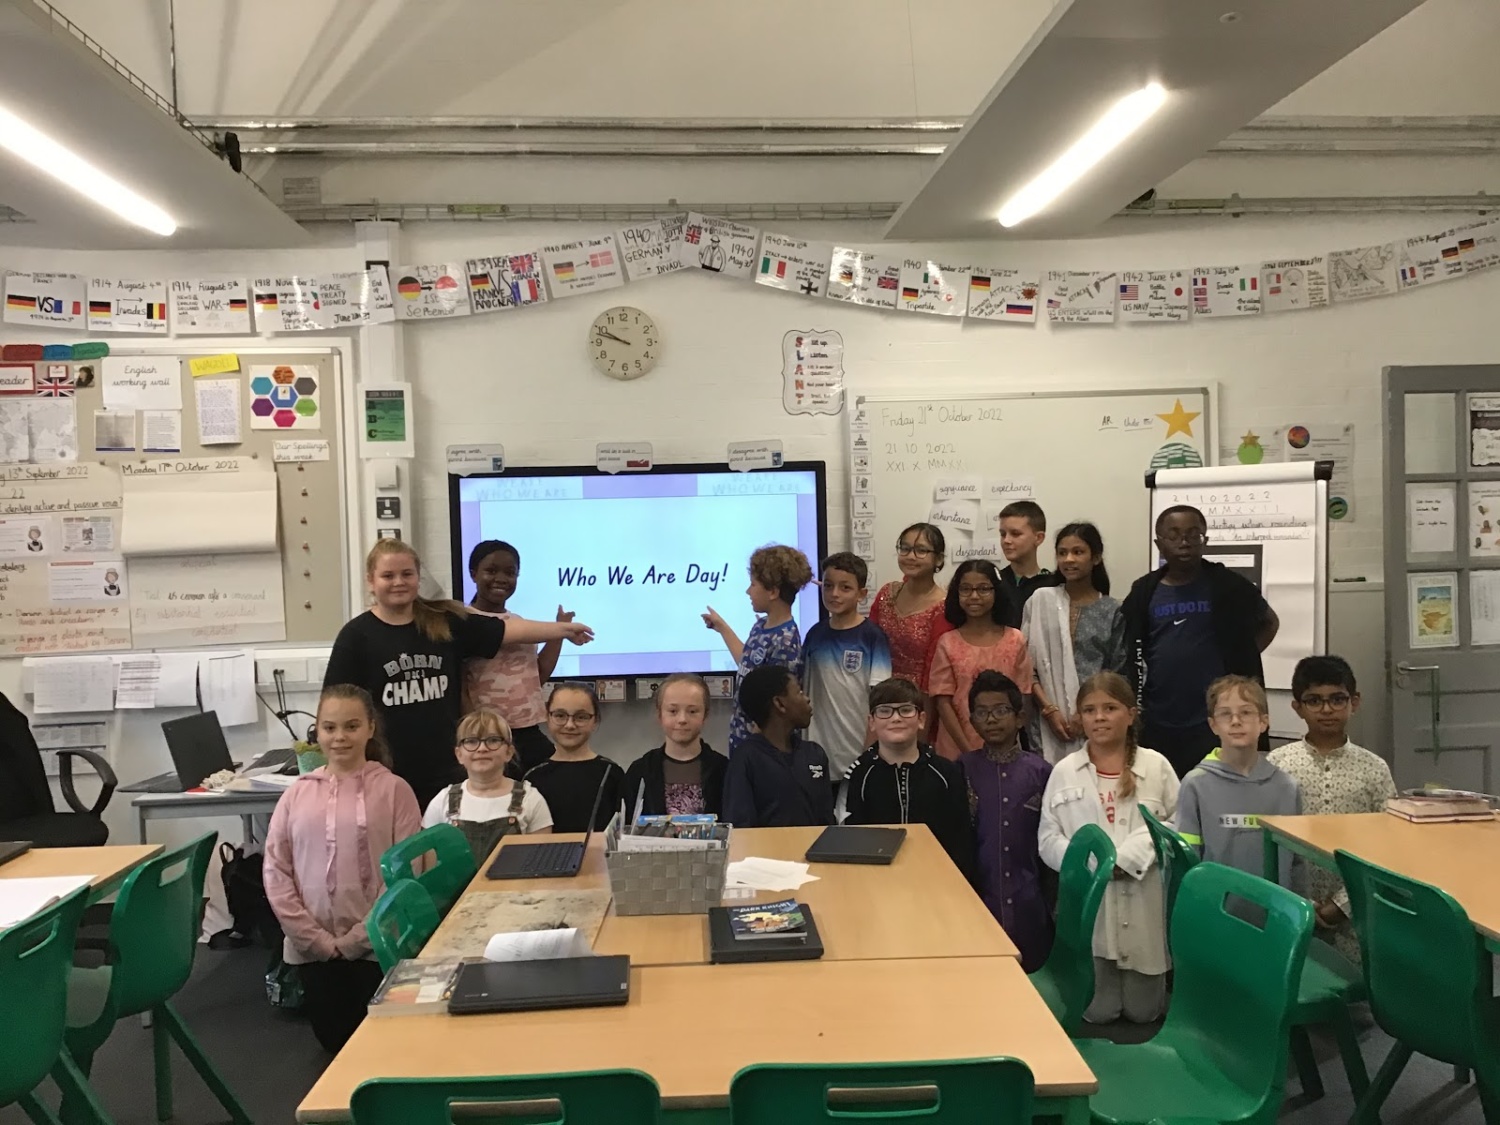 A class of pupils are pictured smiling for the camera together at the front of the class, after giving a presentation called 'Who We Are Day'.